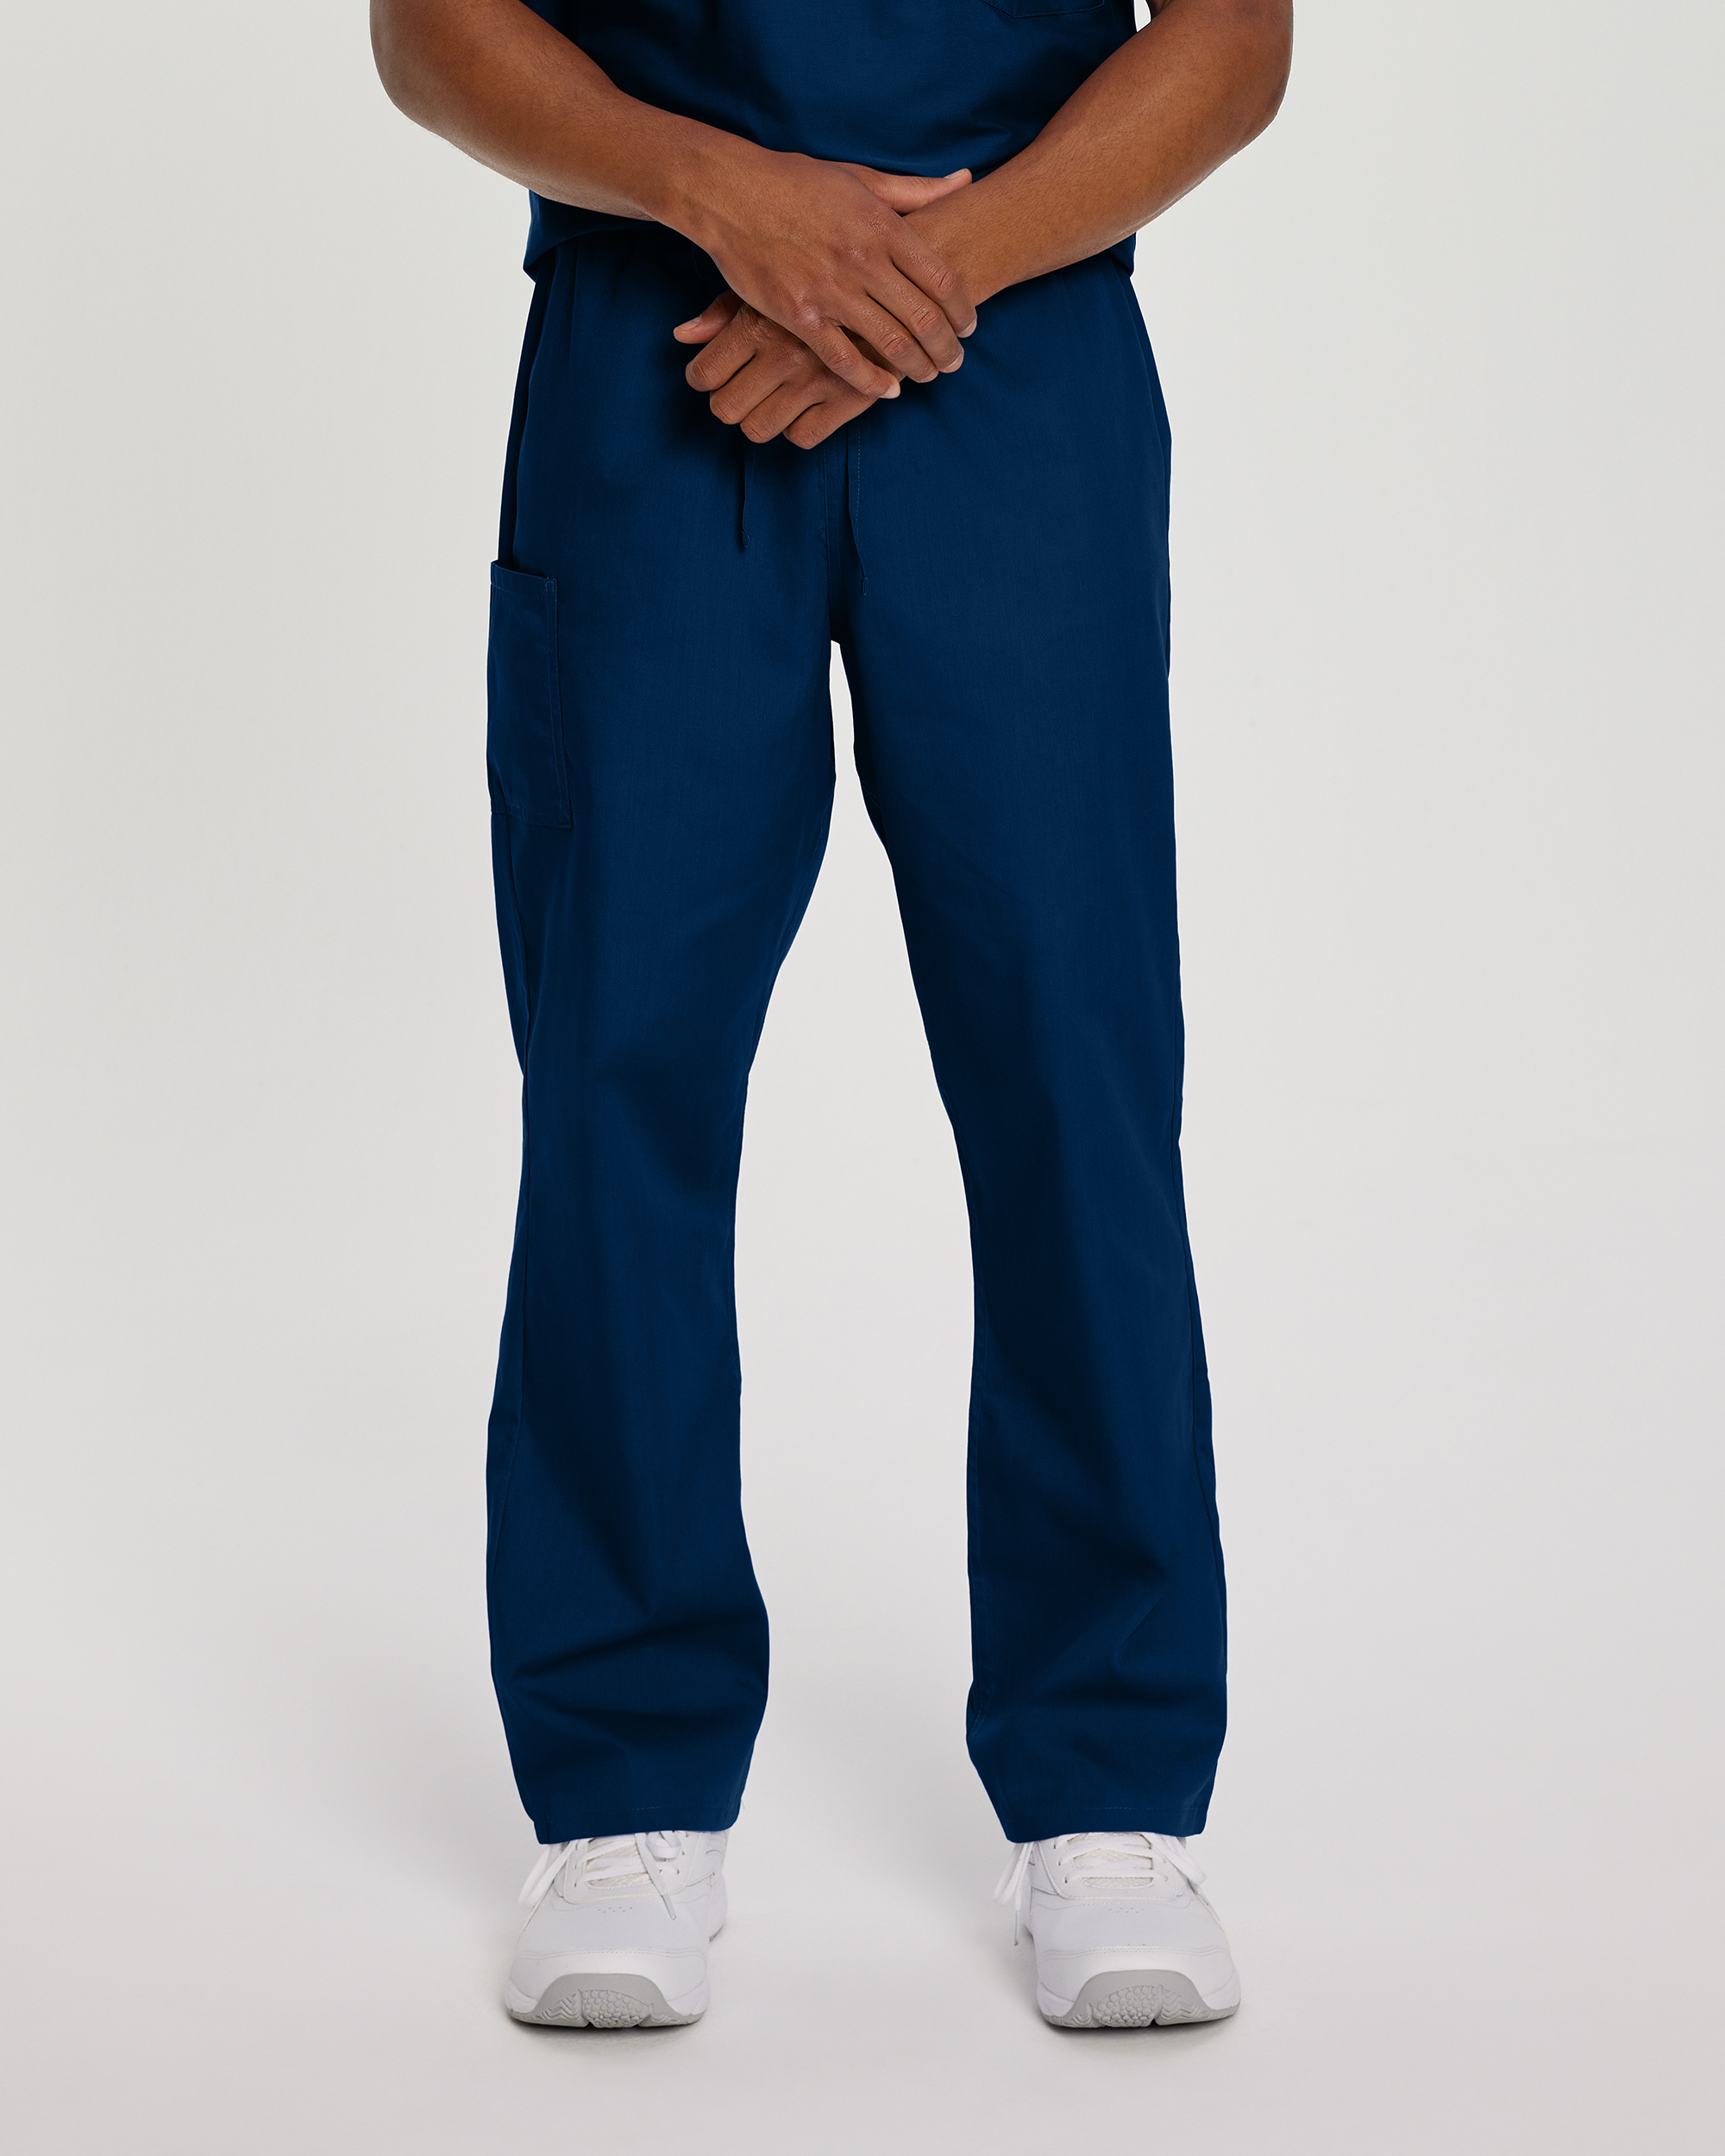 How many pockets do these scrub pants have and what are their types?